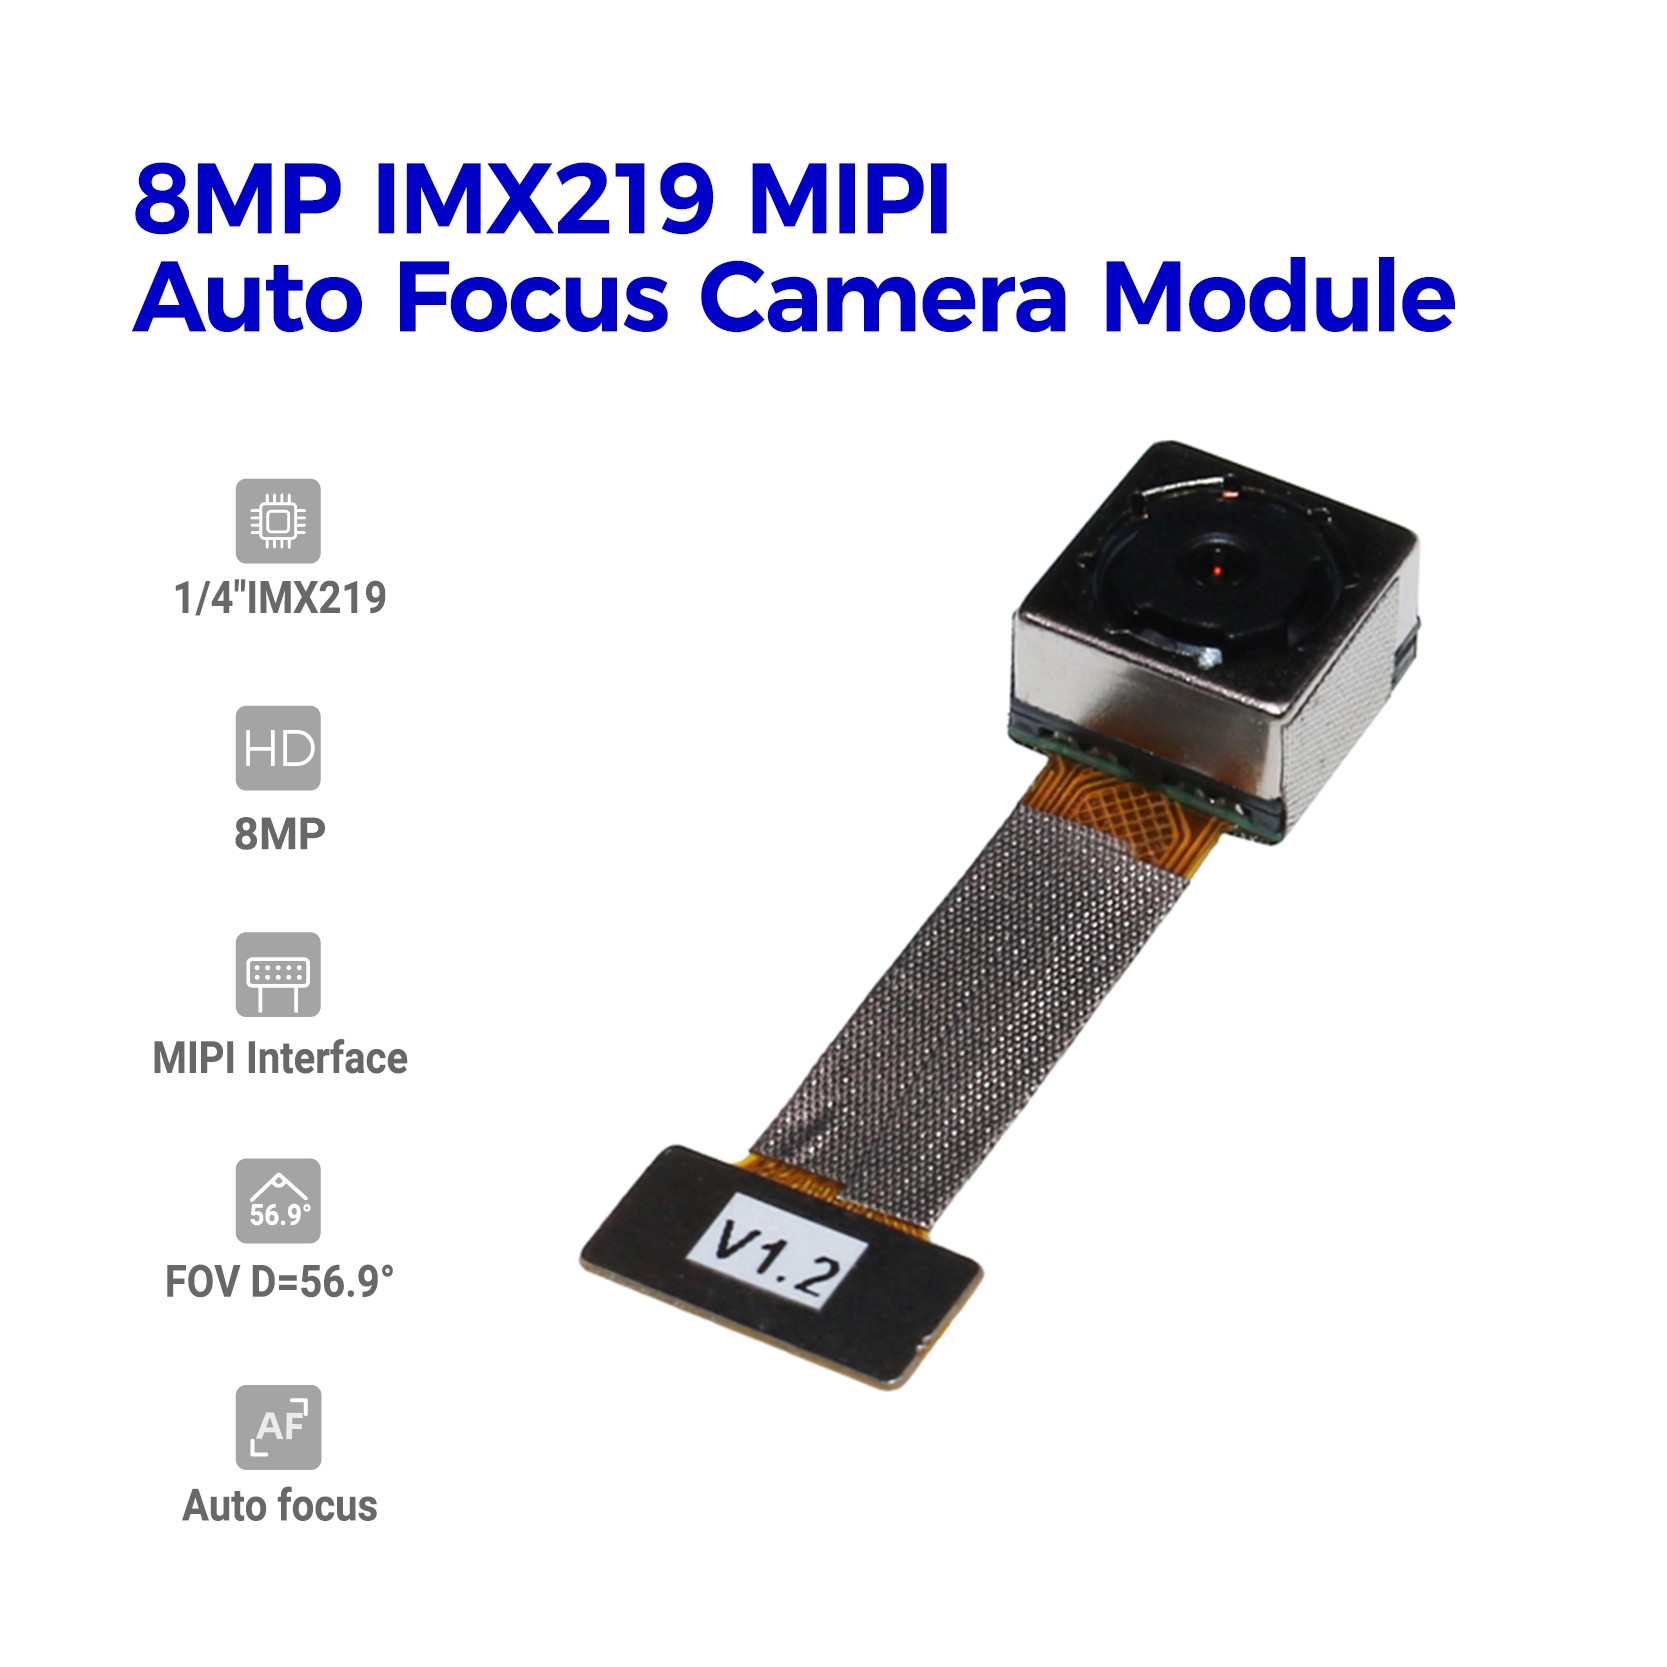 8MP IMX219 MIPI Camera Module with AF Auto Focus Lens Featured Image